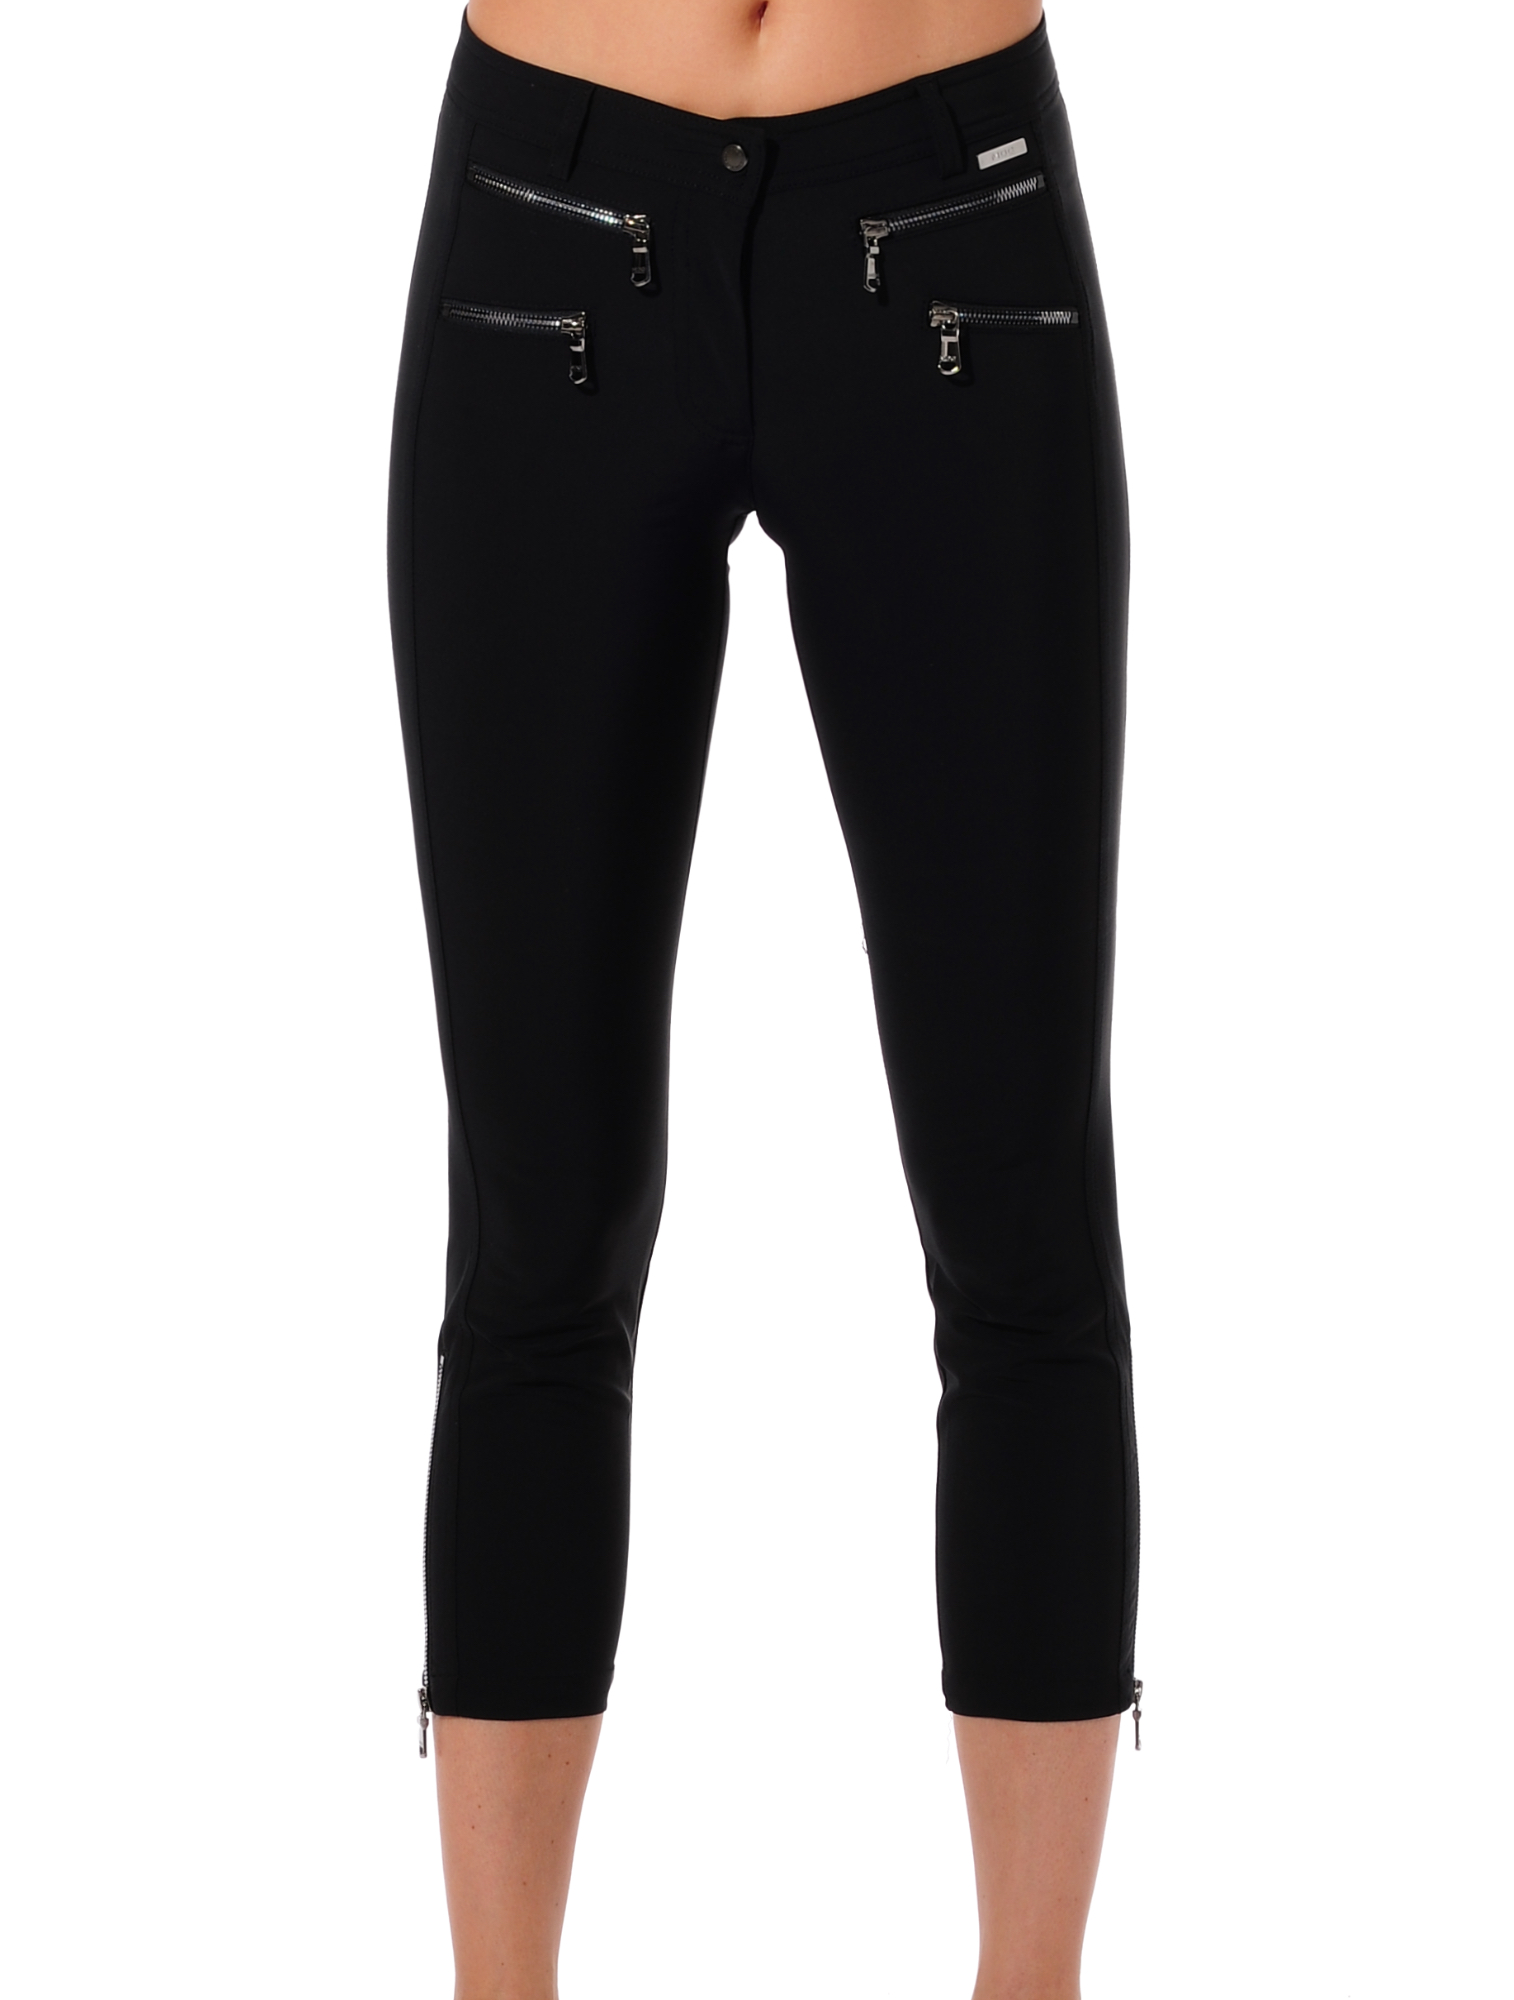 4way stretch double zip cropped pants black, 40